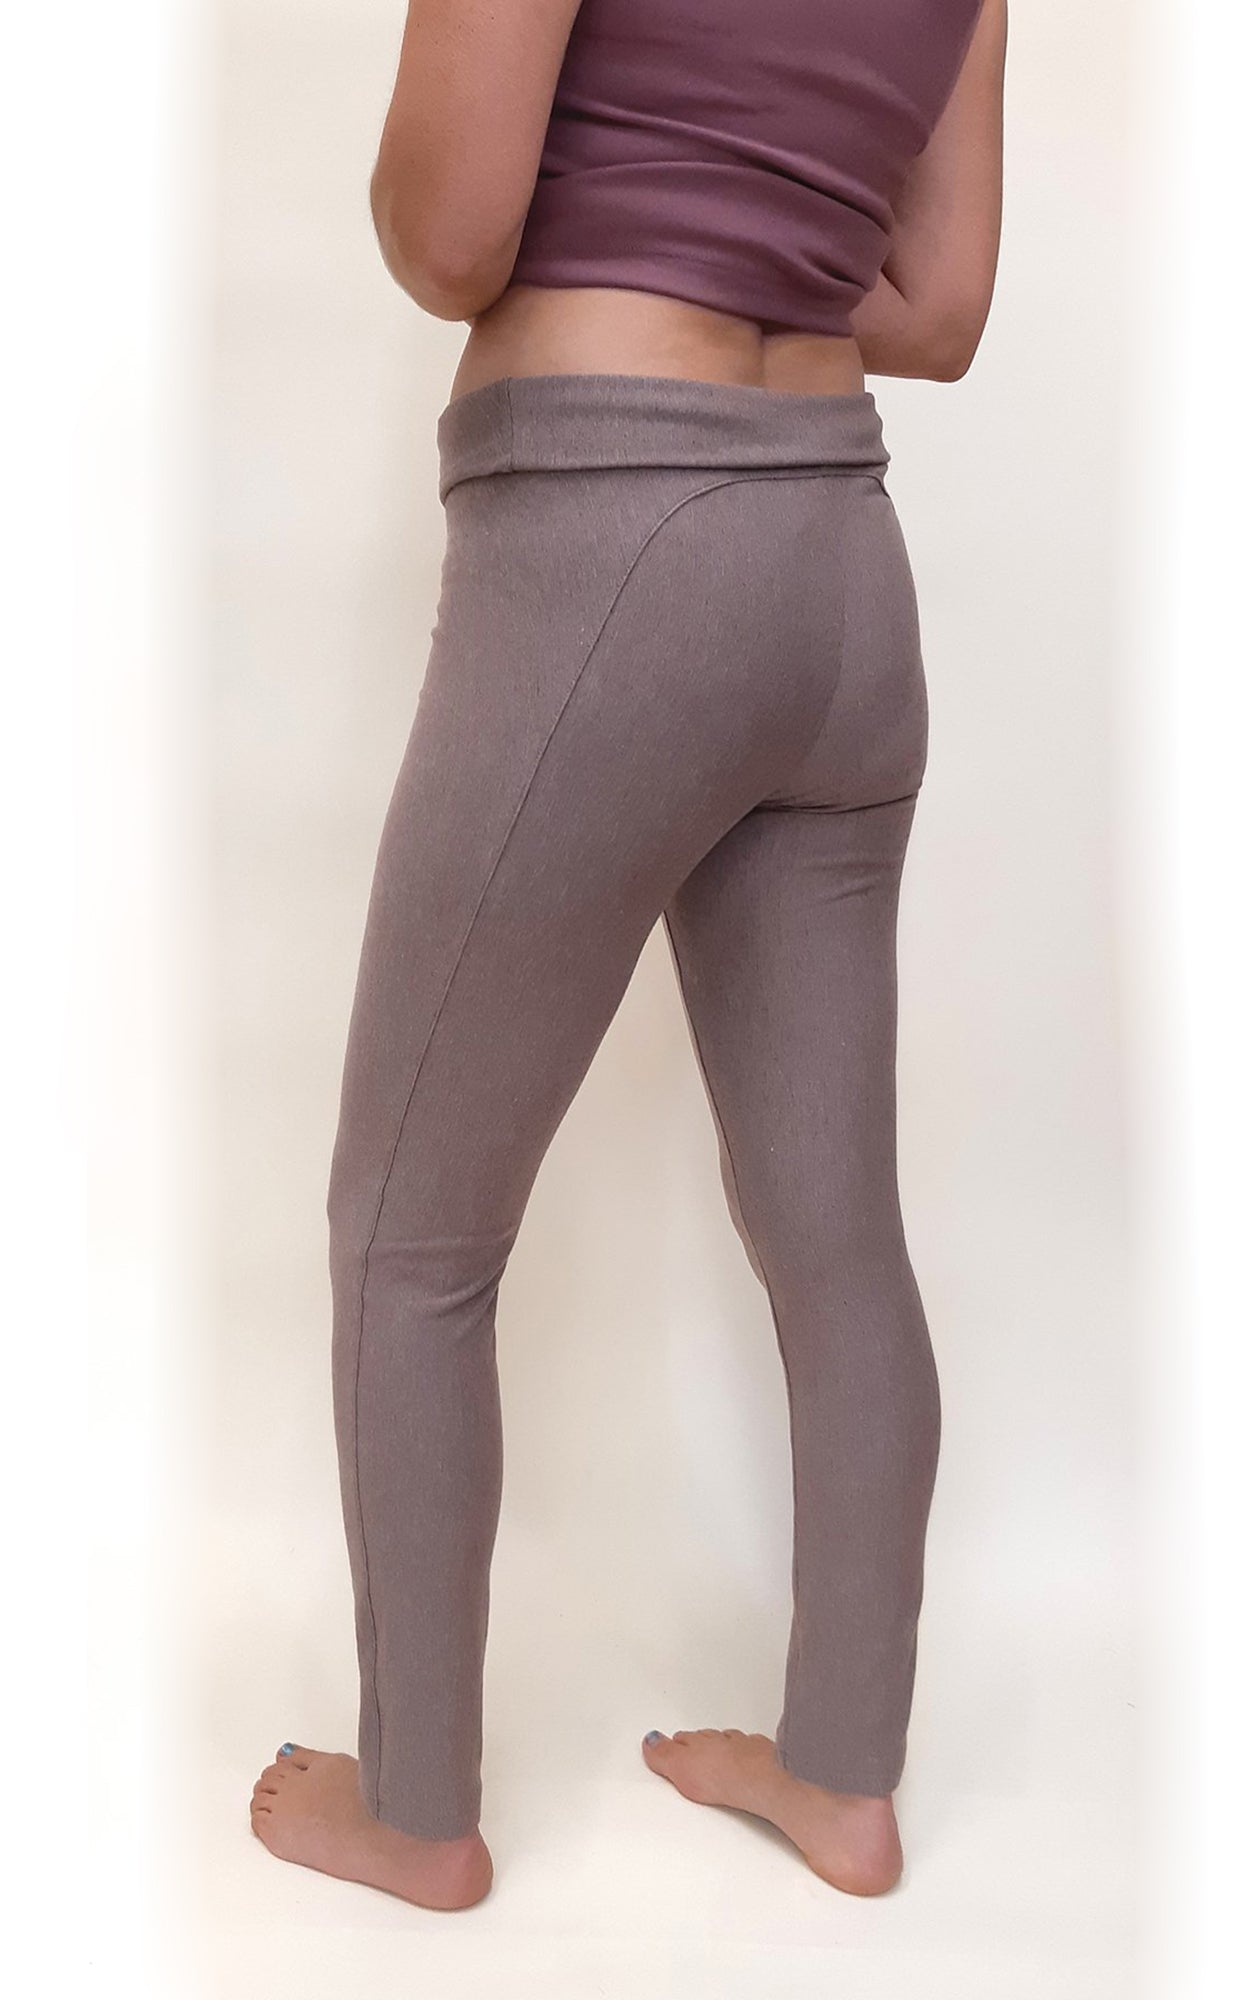 Bamboo Terry Leggings Riding Tights Chocolate